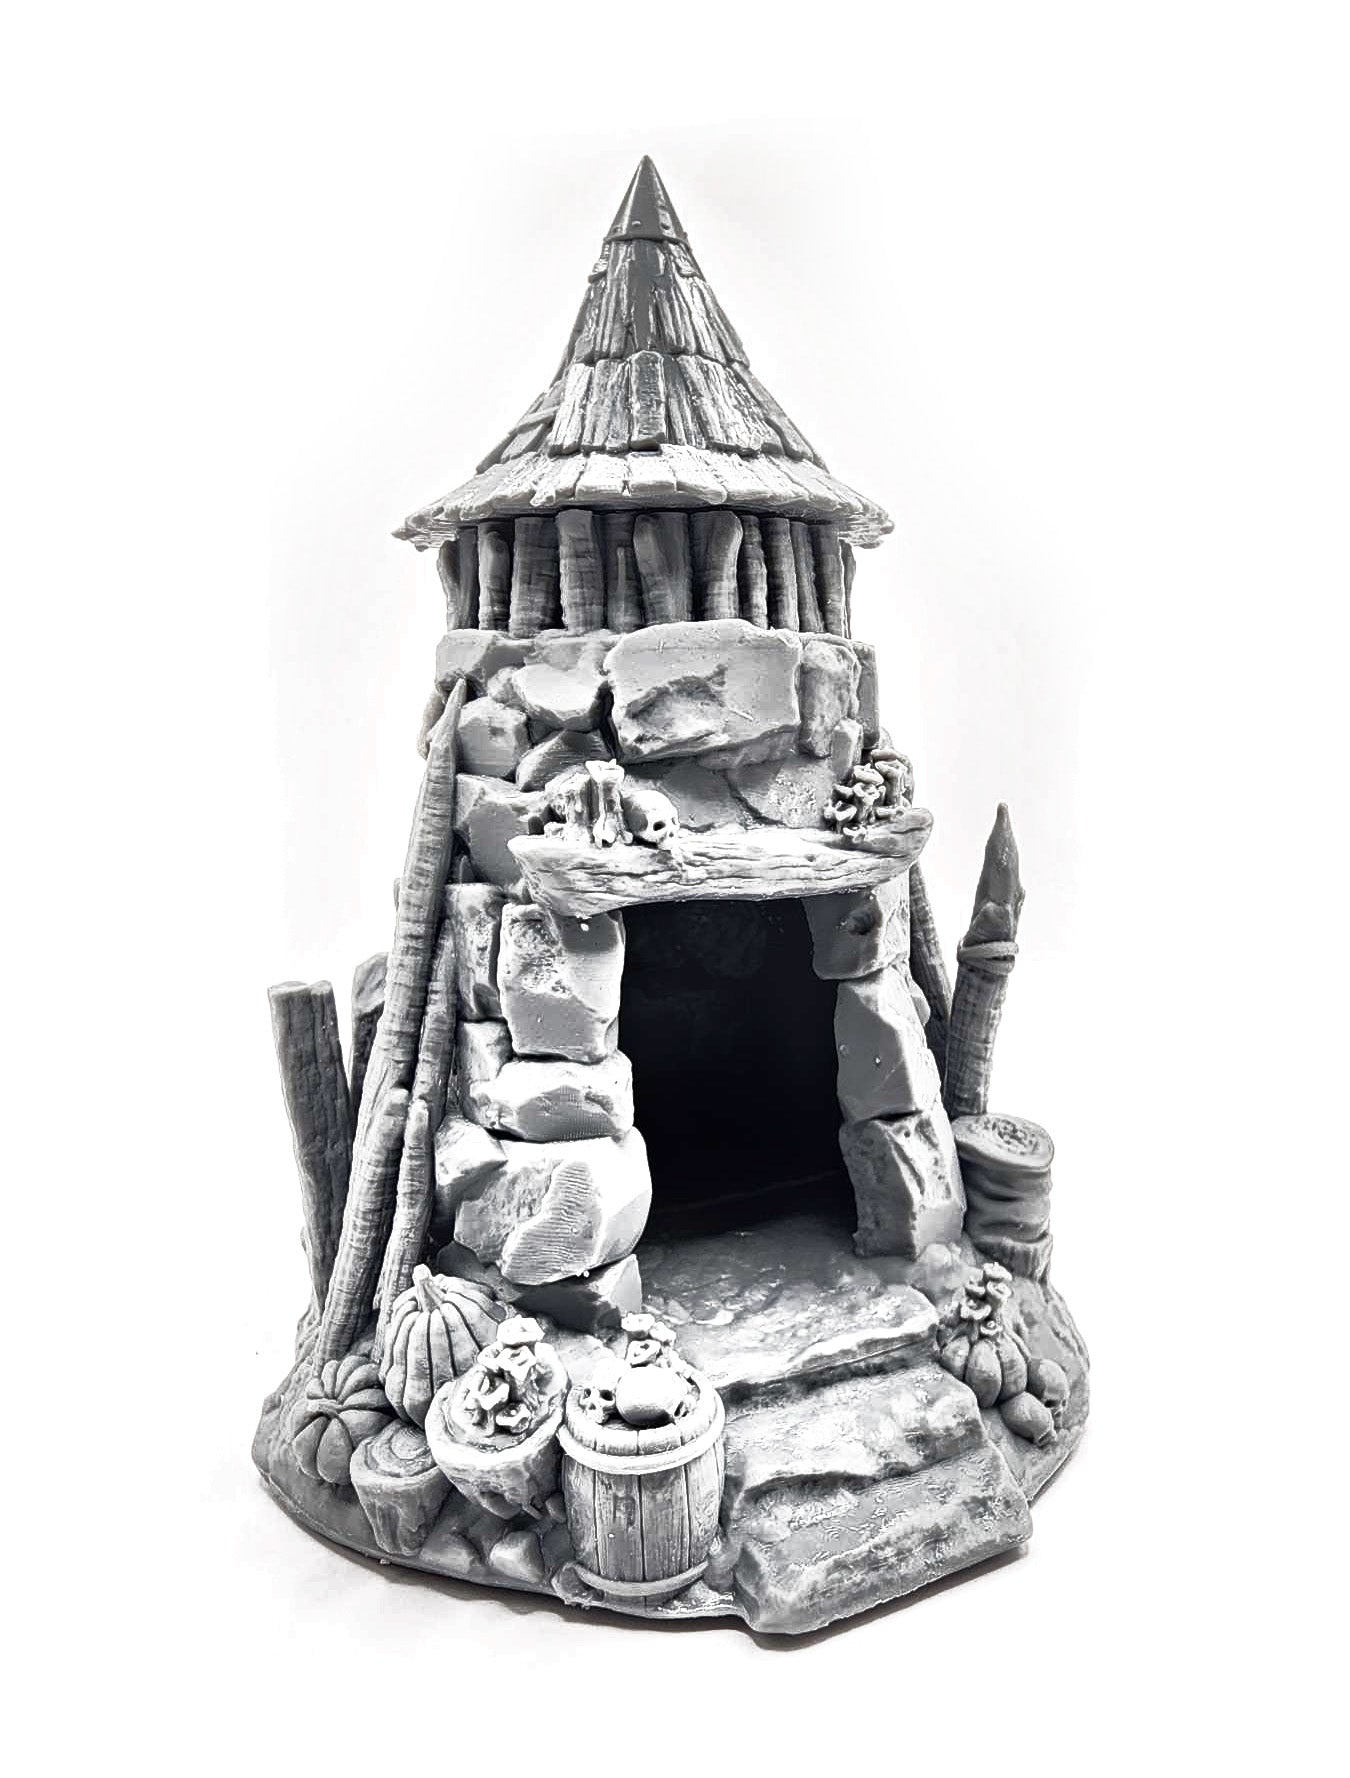 Complete Urgell Chapter 6 Terrain and Miniatures by The Dungeon's Forge